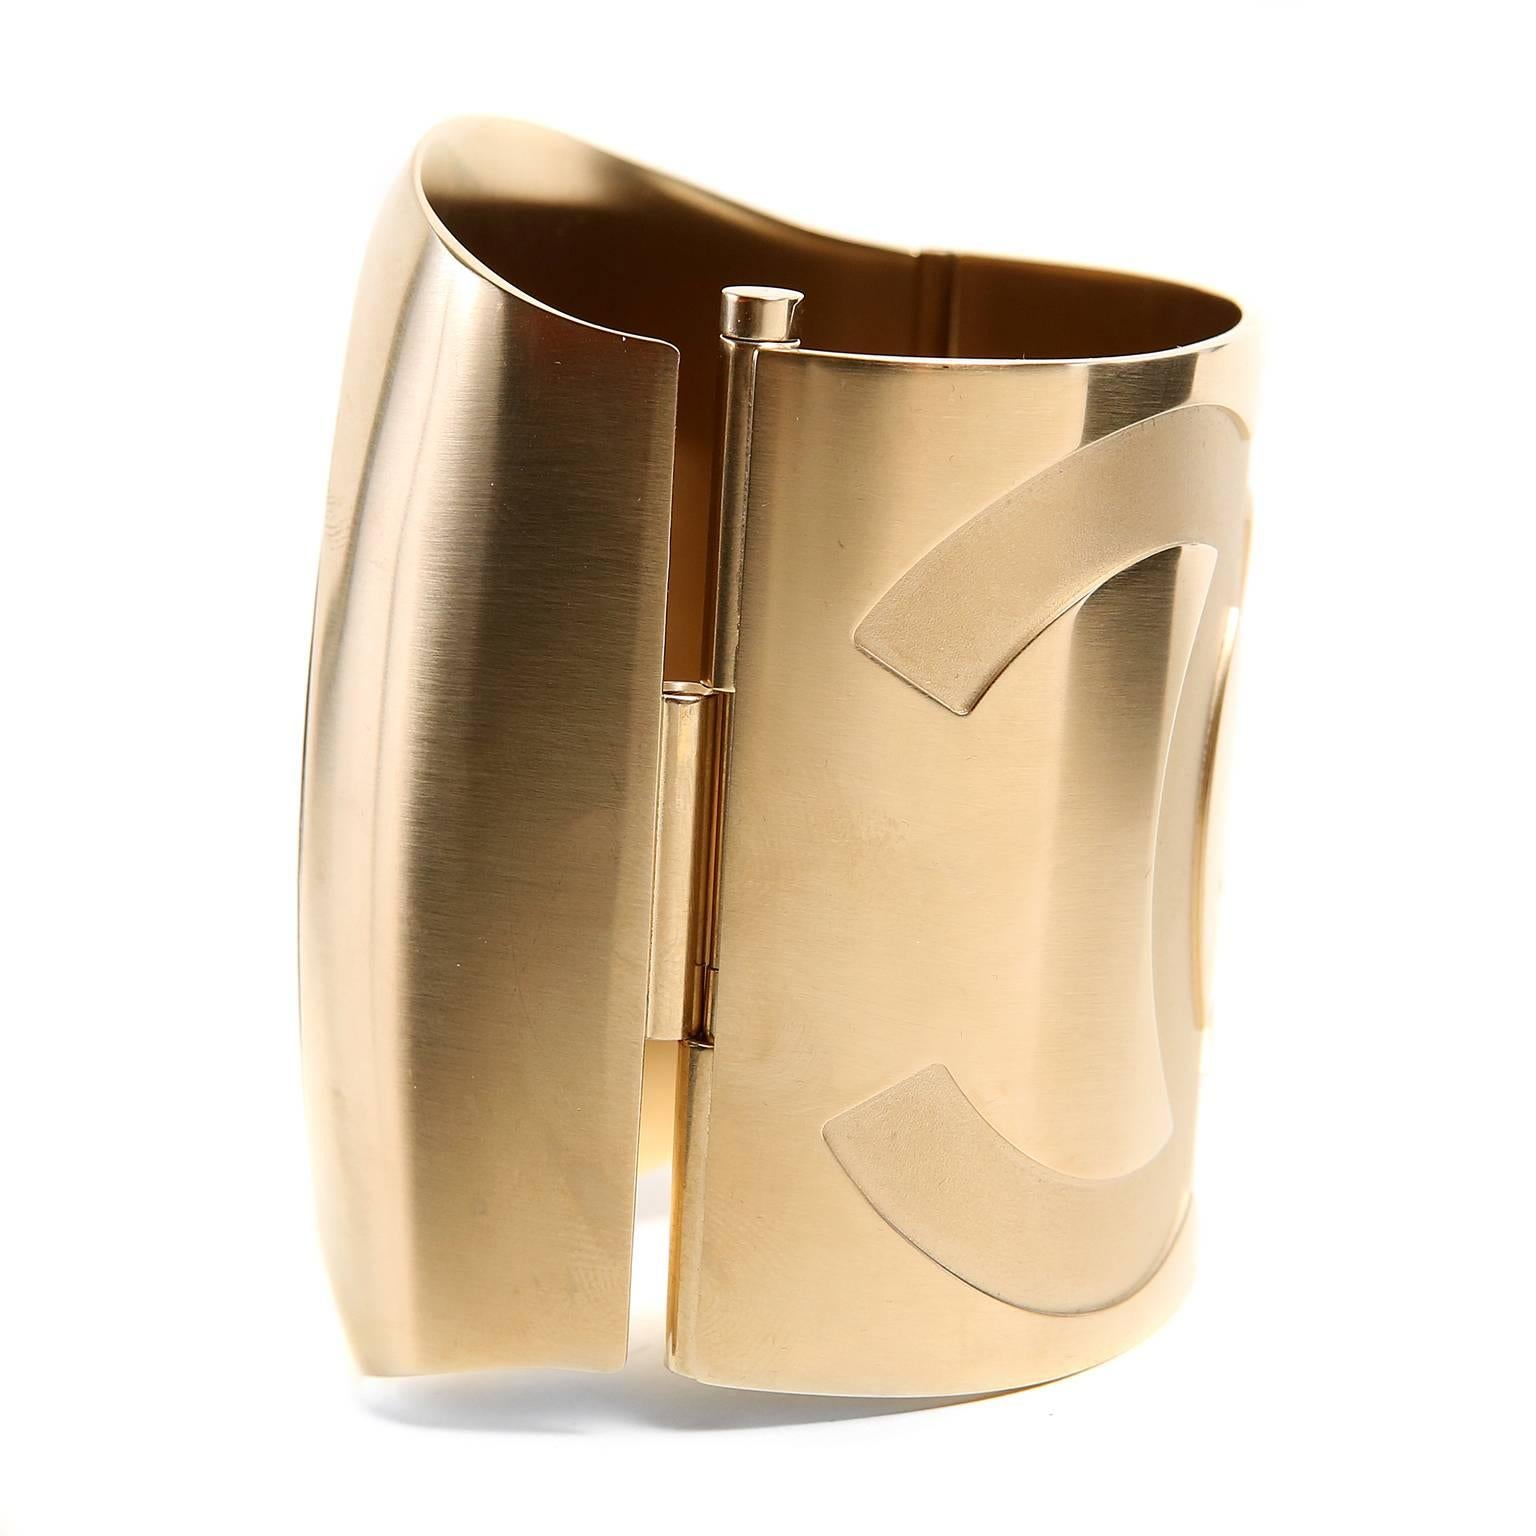 hanel Gold Matte Hinged Cuff is in pristine condition.  Collectible and versatile, this striking cuff can be worn with a tee and jeans or a formal gown.  The perfect gift for a Chanel lover.
 
 Large gold tone cuff has colossal tonal interlocking